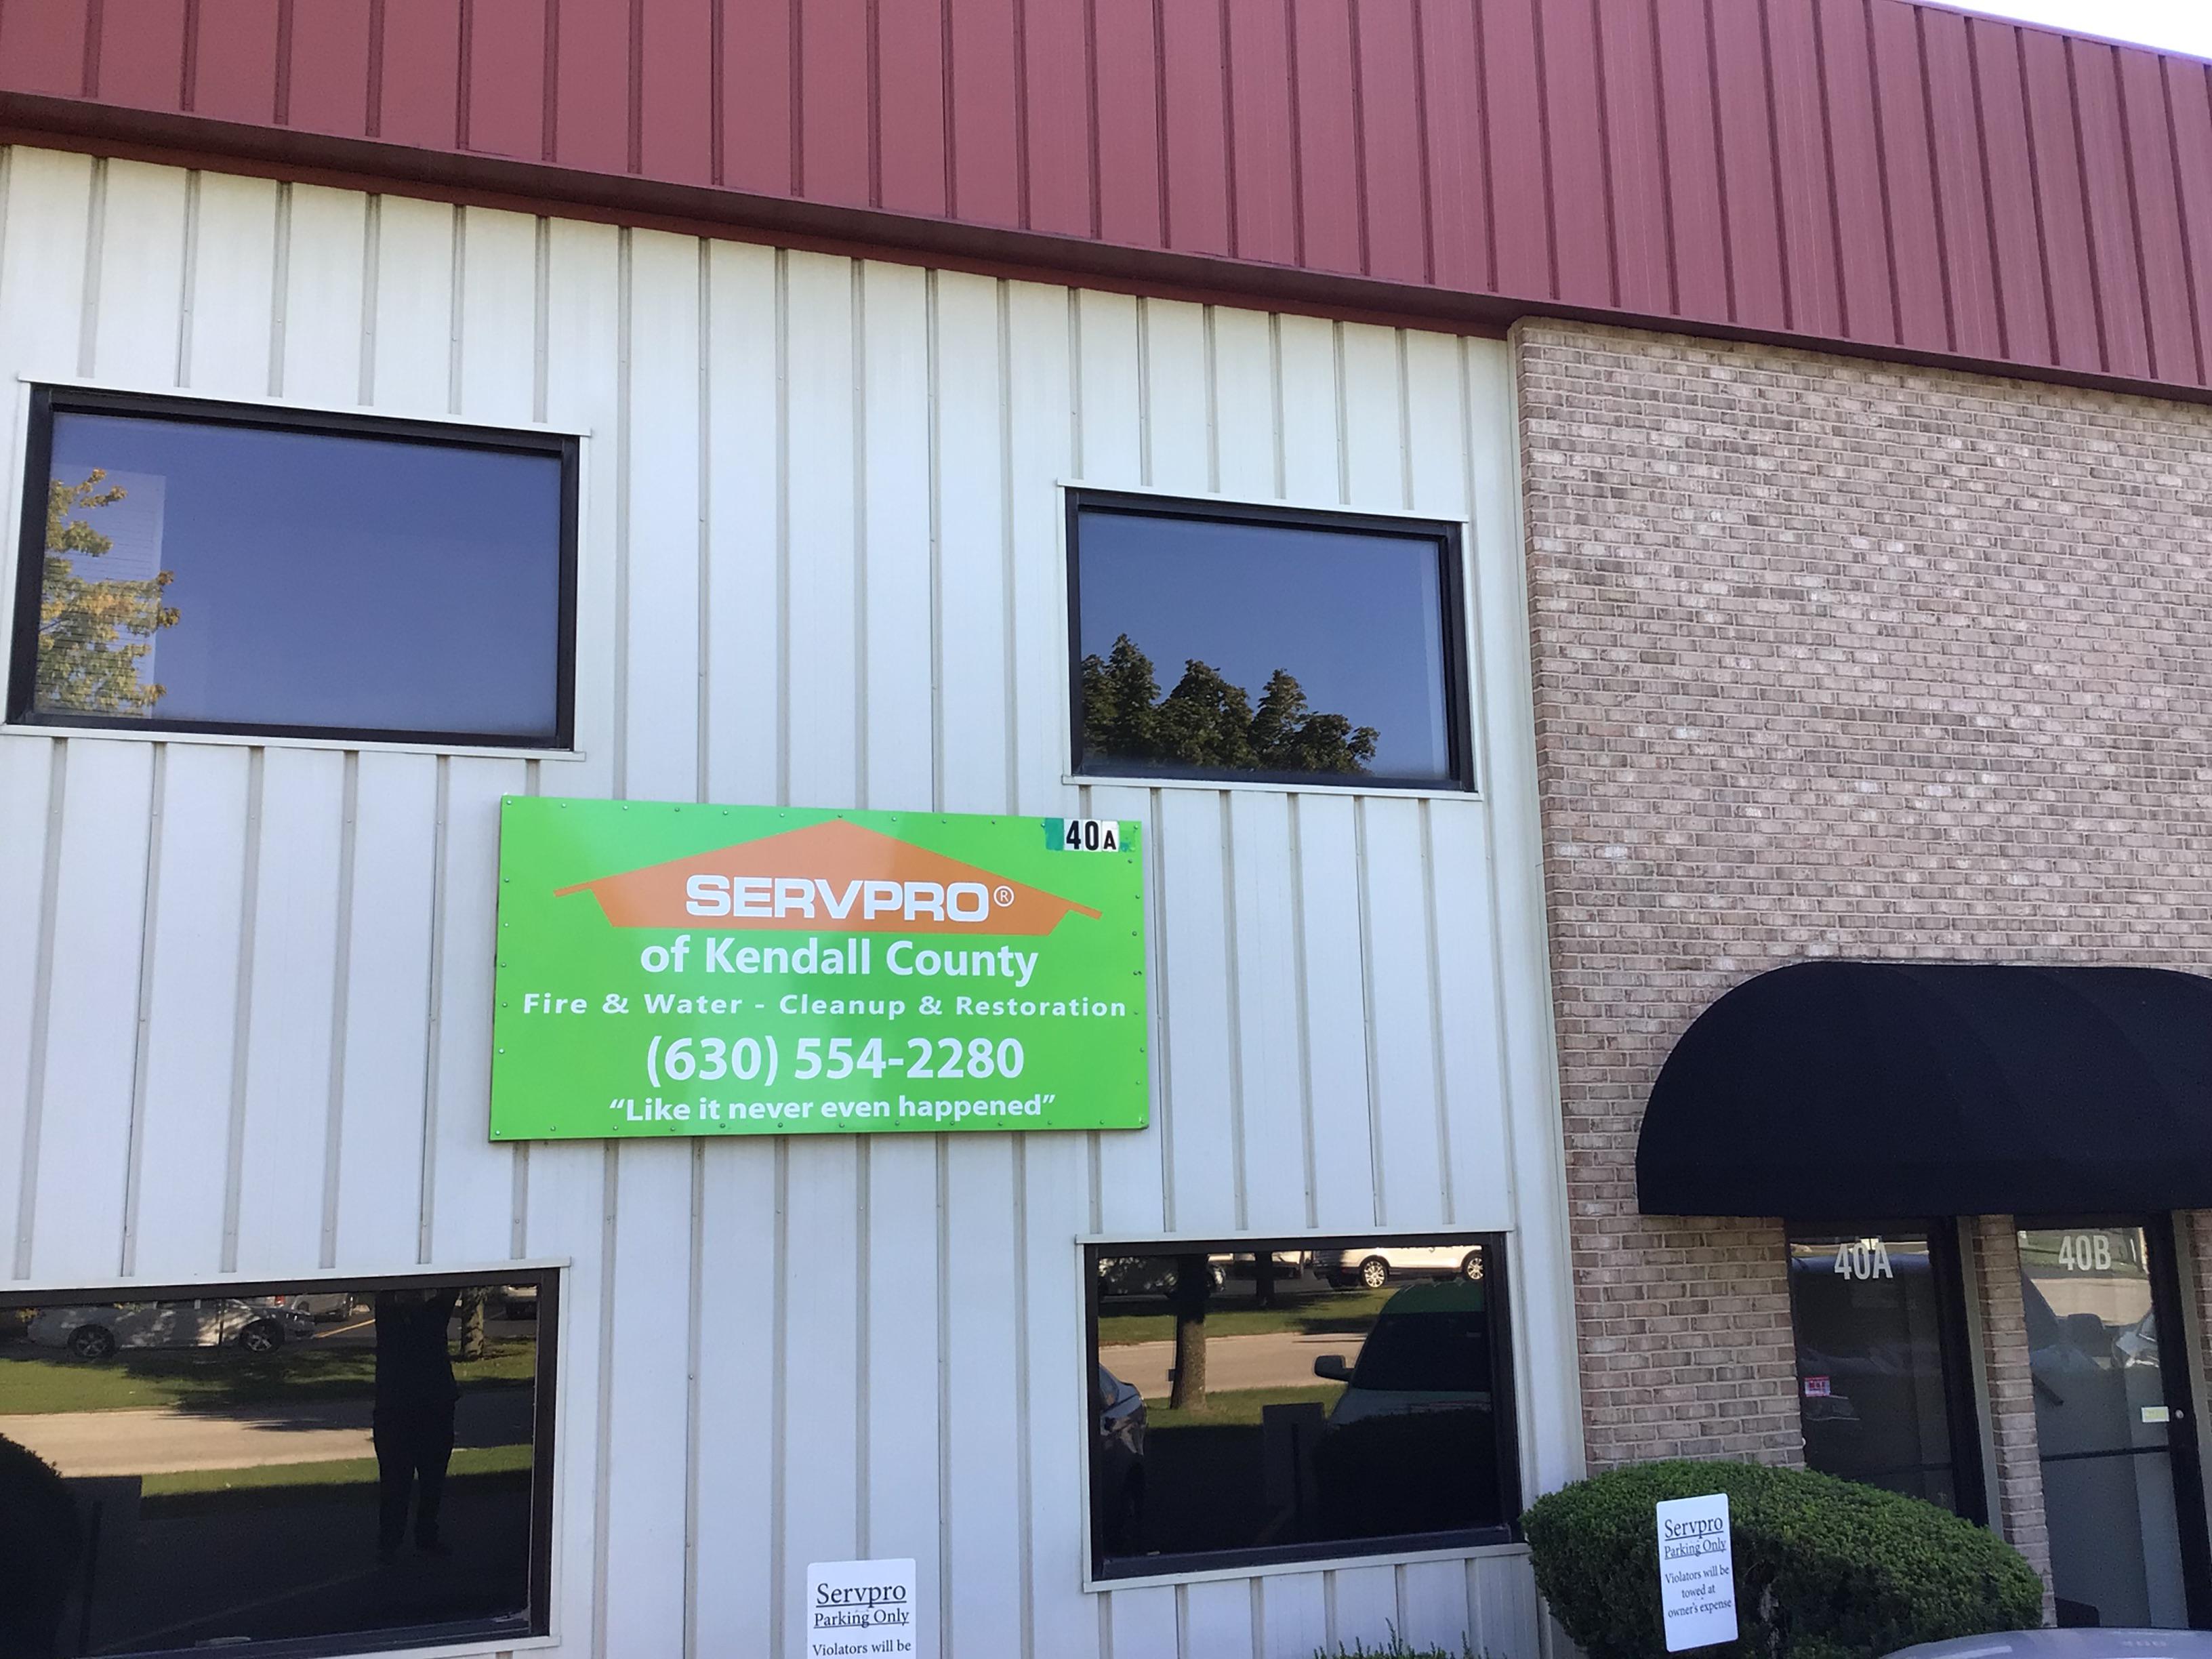 SERVPRO of Kendall County is located at 40A Stonehill Rd
                                                                        Oswego, IL 60543
                                                                         630-554-2280